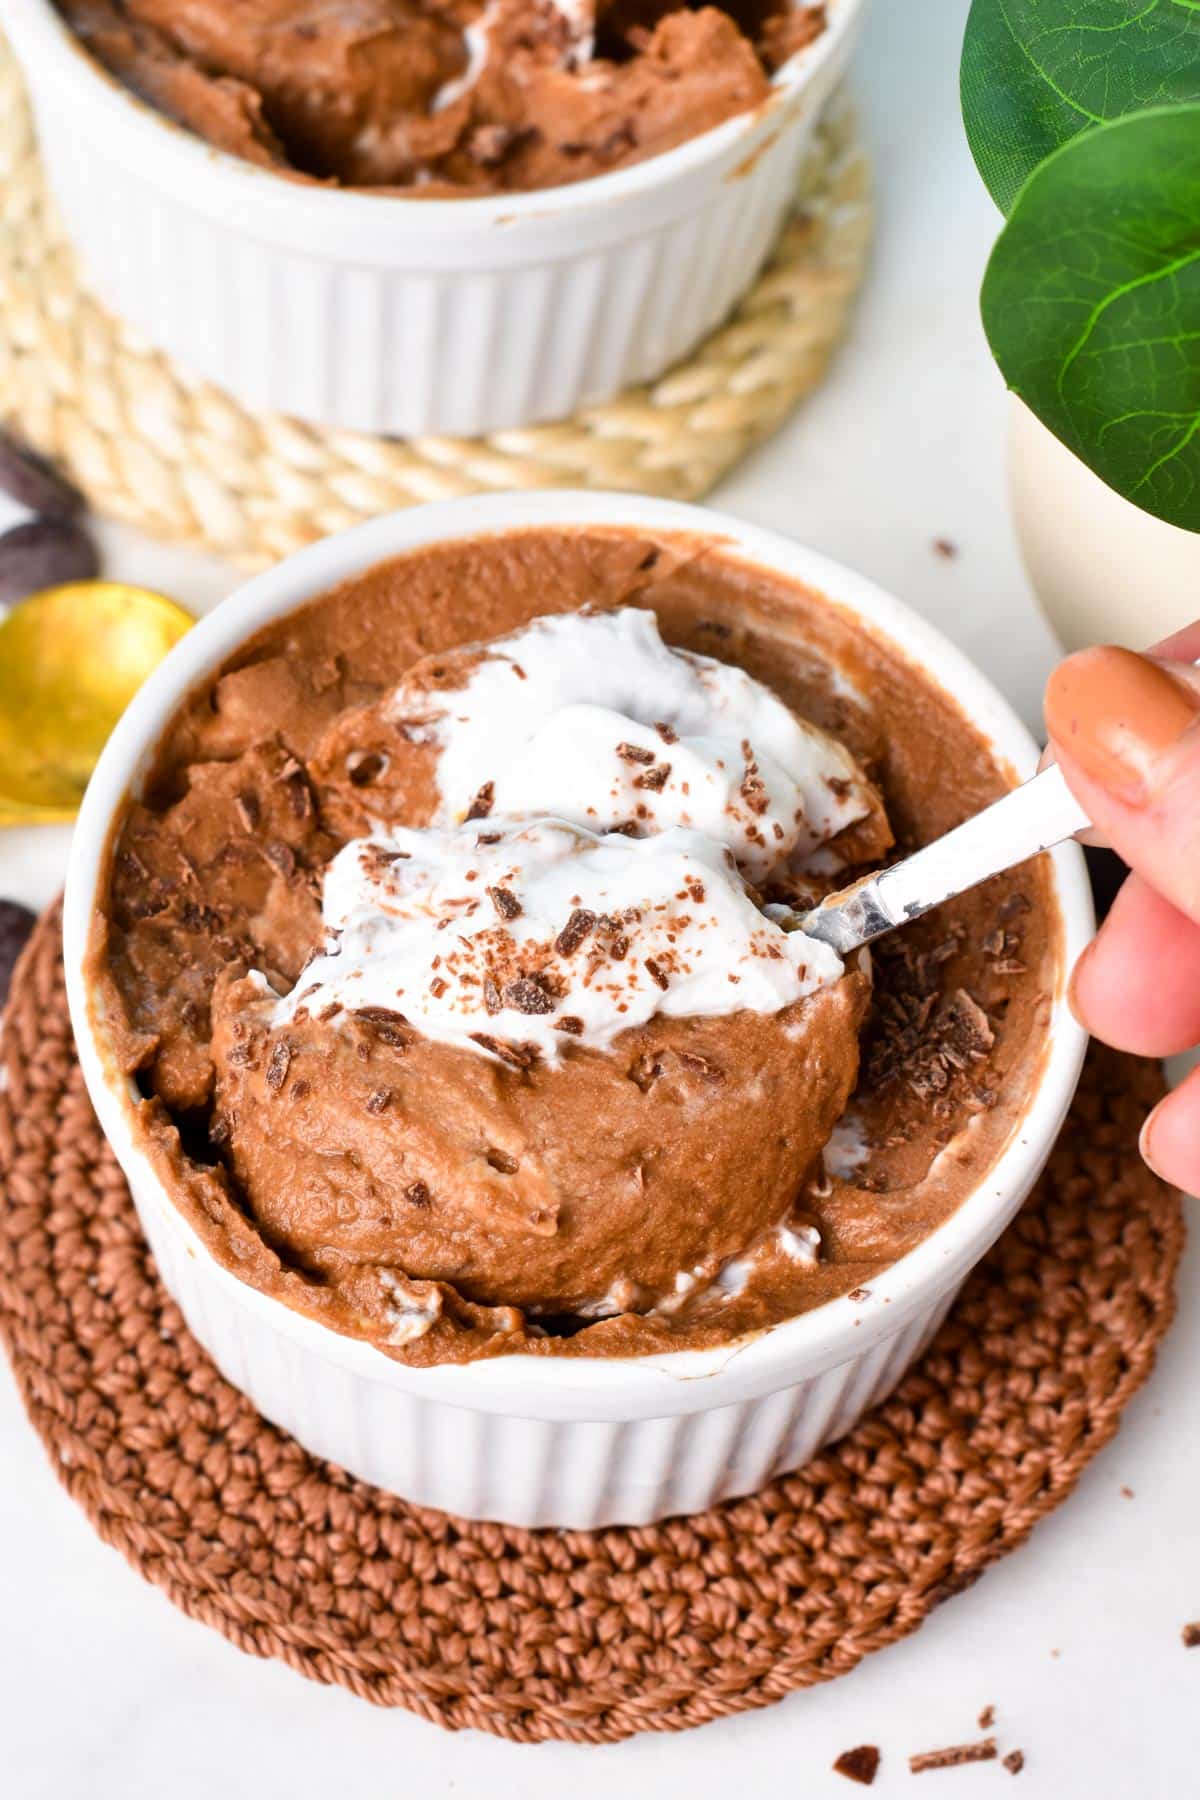 A spoon digging in a bowl filled with chocolate mousse and coconut yogurt.